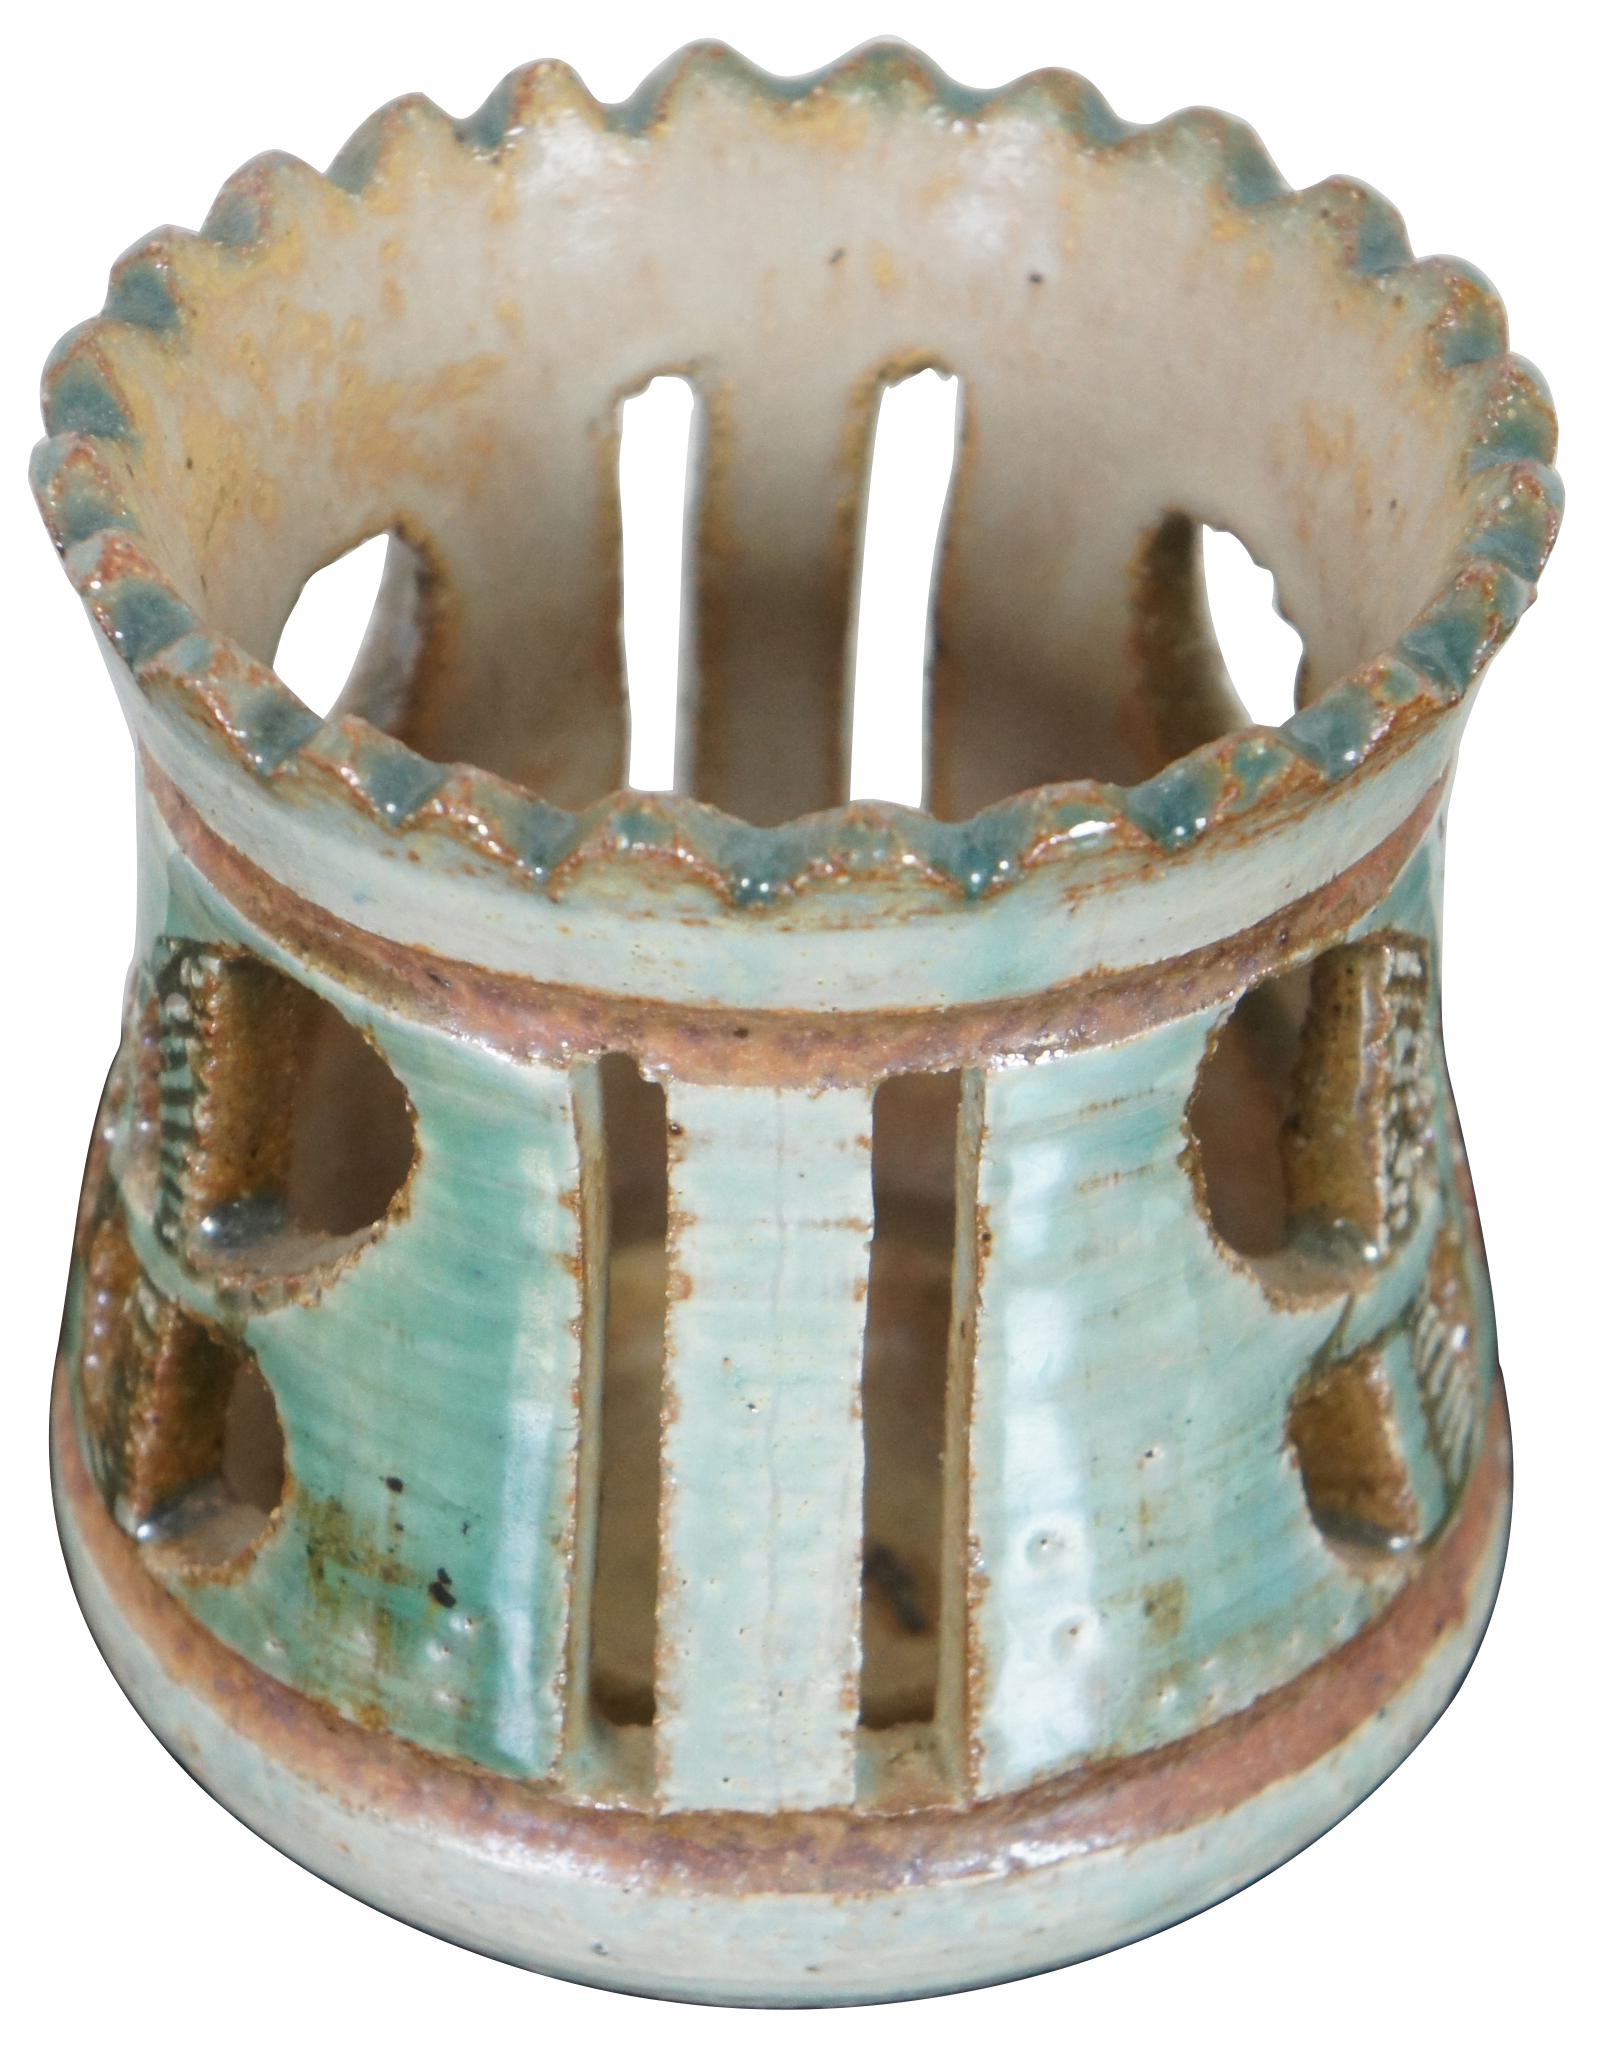 Vintage handmade ceramic candleholder by John Nartker, featuring a pierced butterfly design and a light turquoise glaze with brown details. Signed on vase. BIO: John Nartker (1930-1988) is a multi-media artist whose specialties are painting,